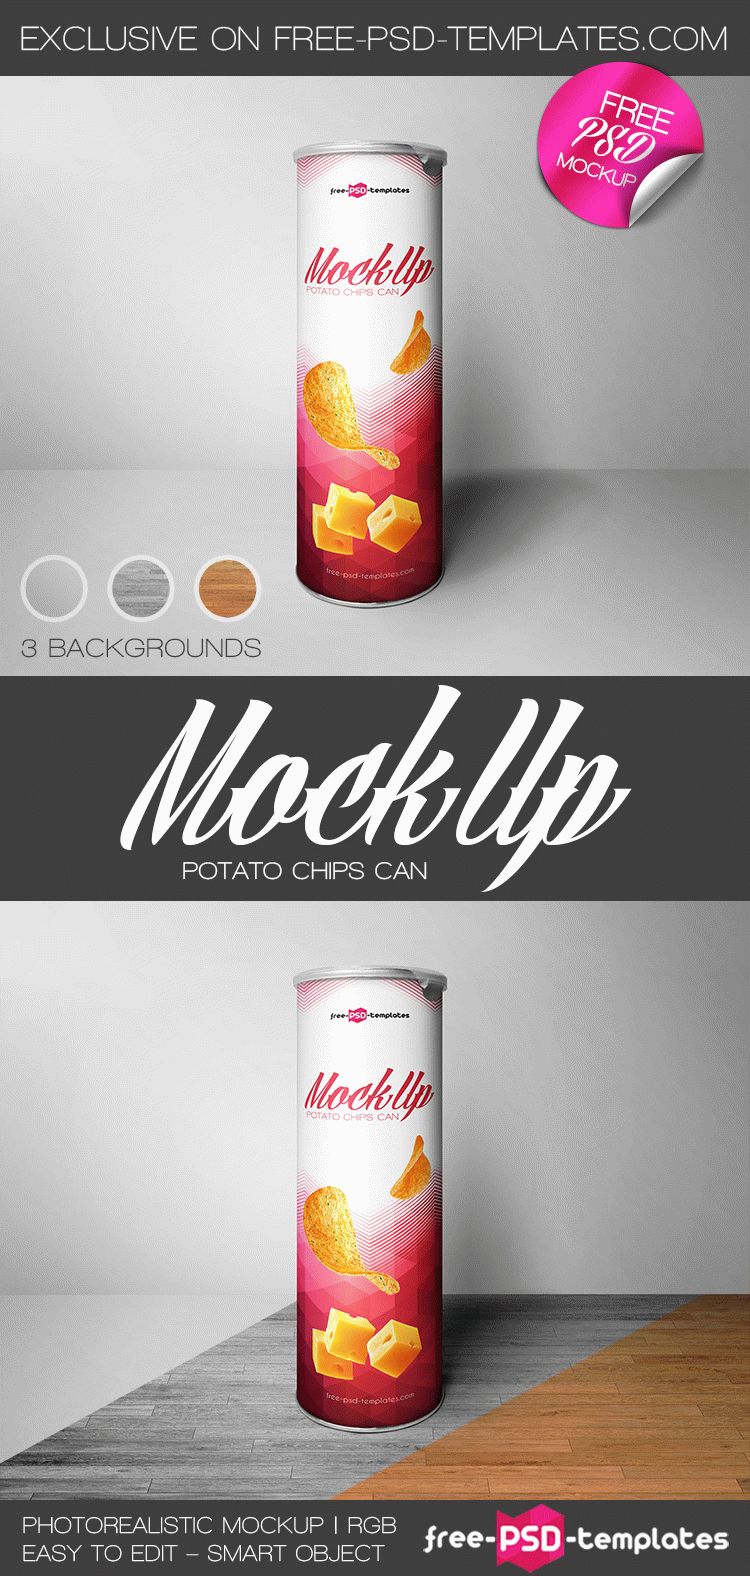 Download Free Potato Chips Can Mock-up in PSD | Free PSD Templates